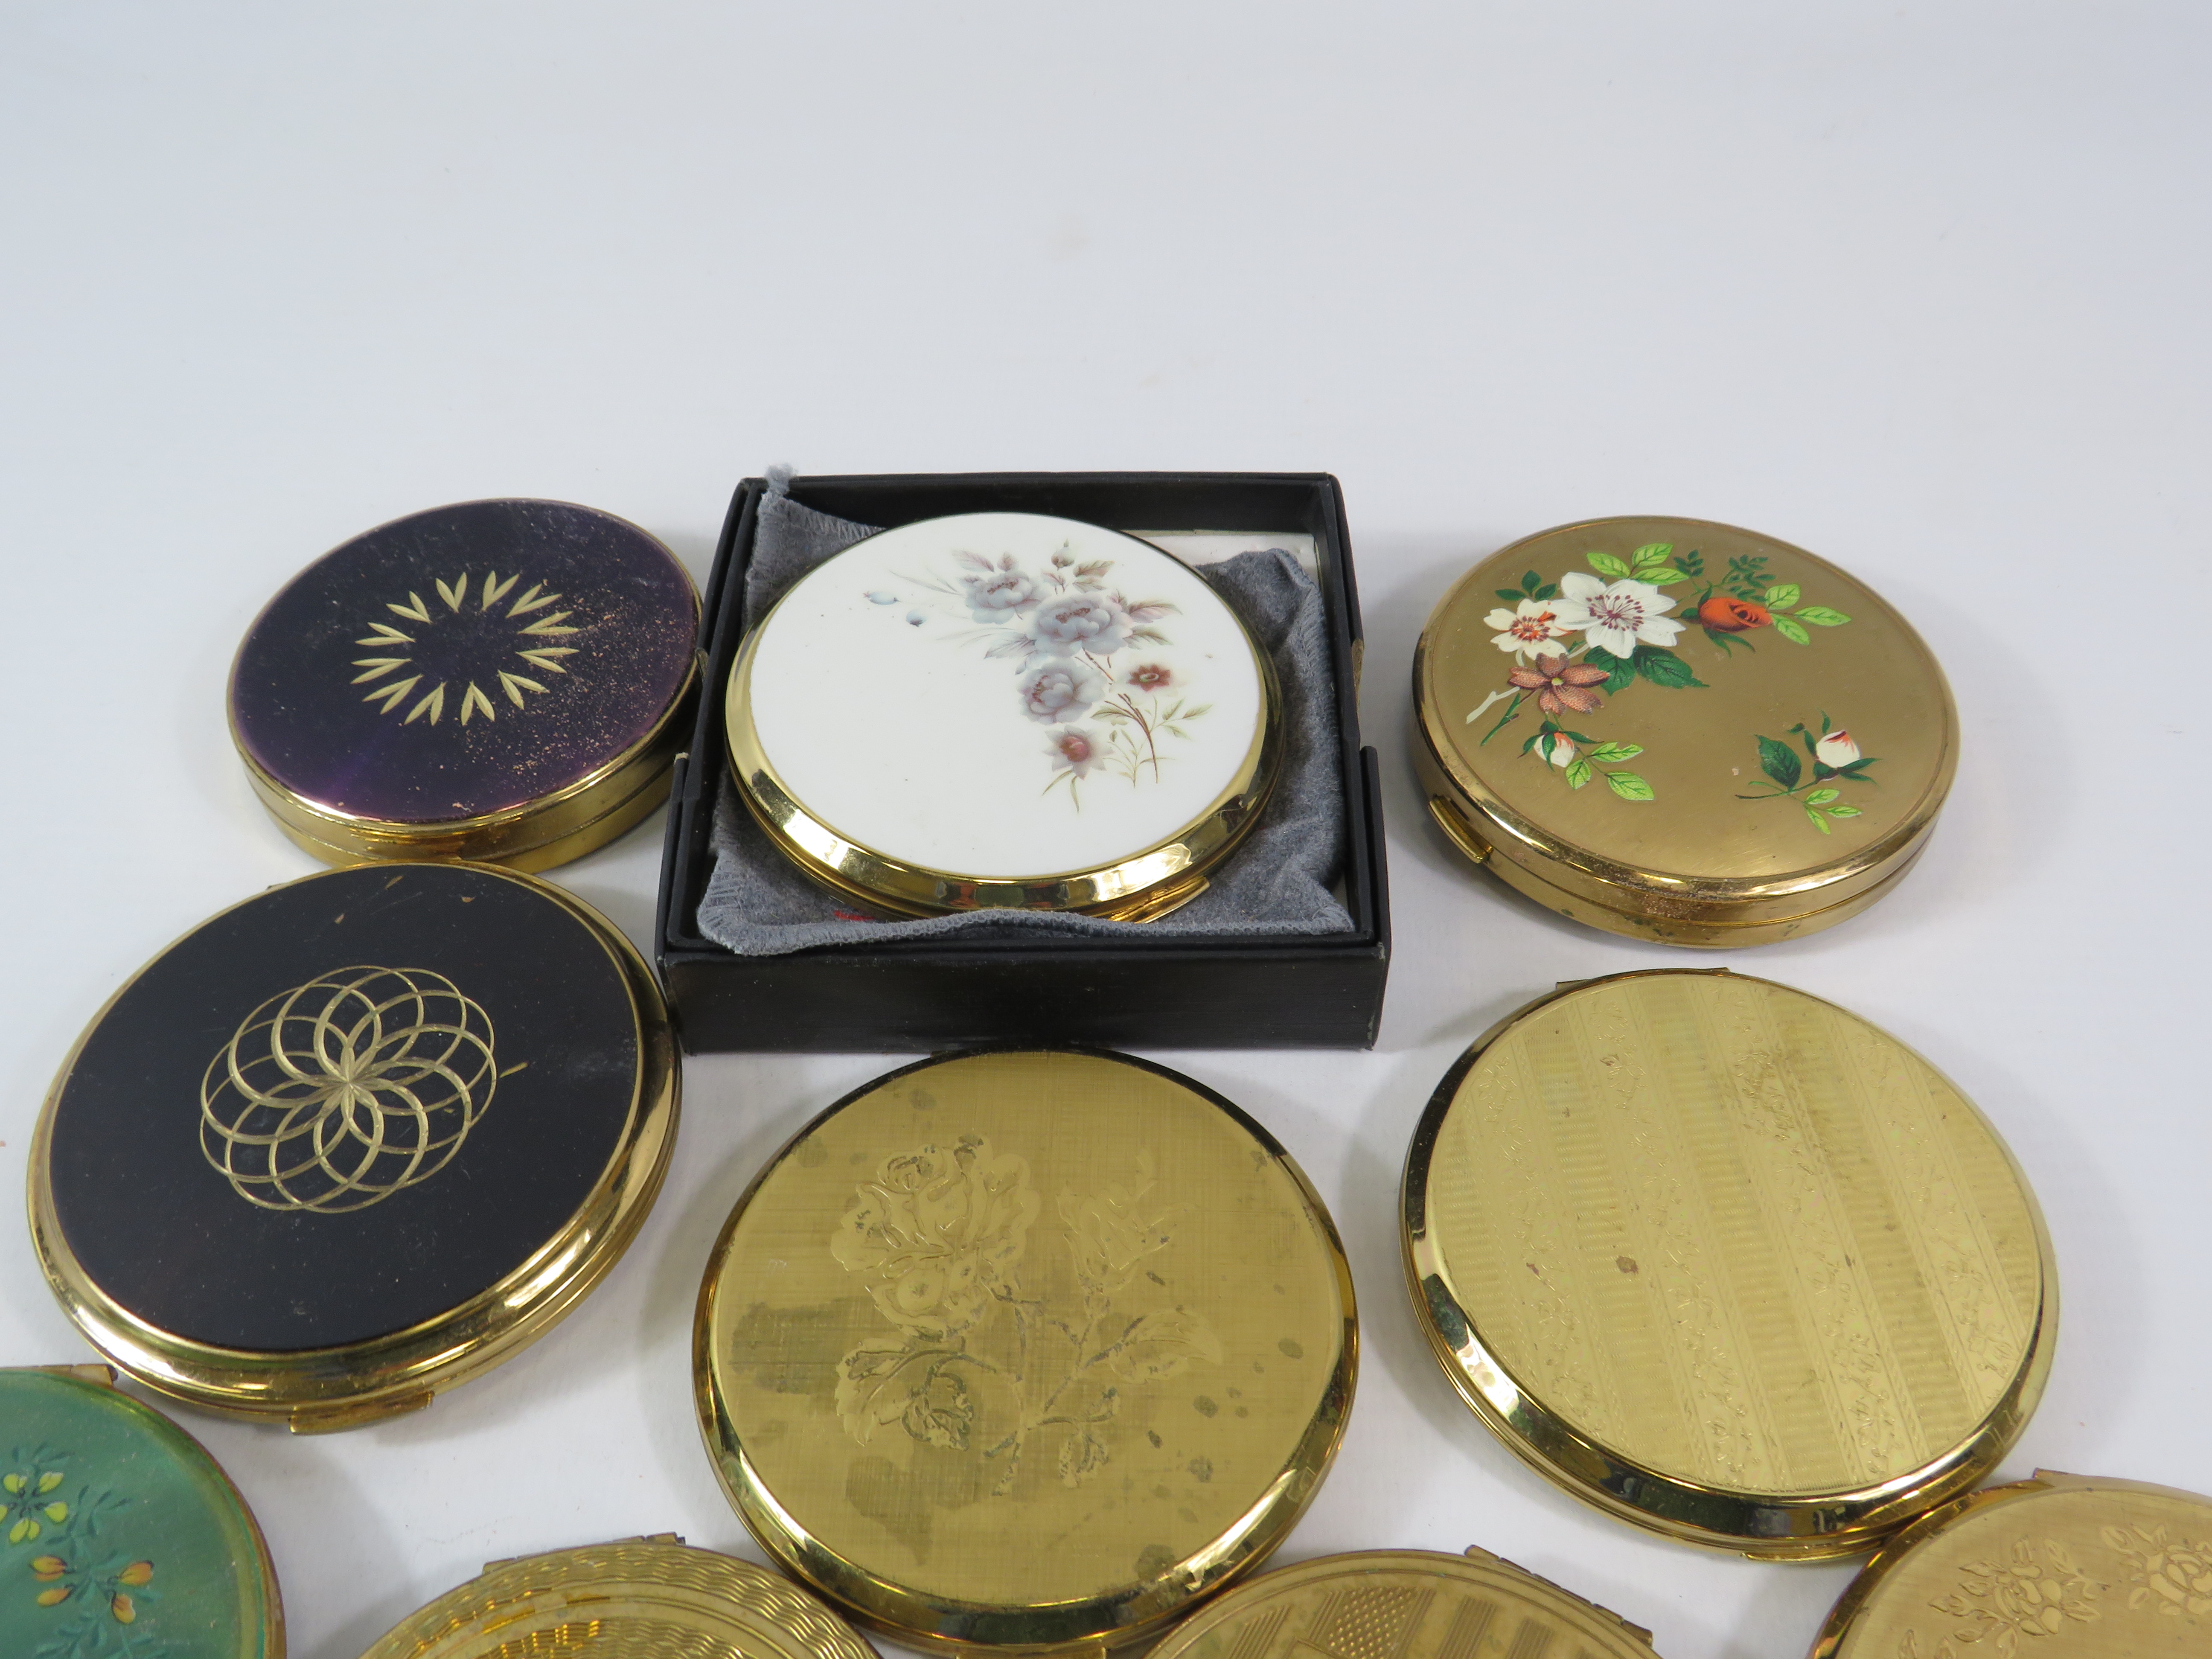 10 Gold tone compacts by Stratton, Kigu etc. - Image 4 of 4